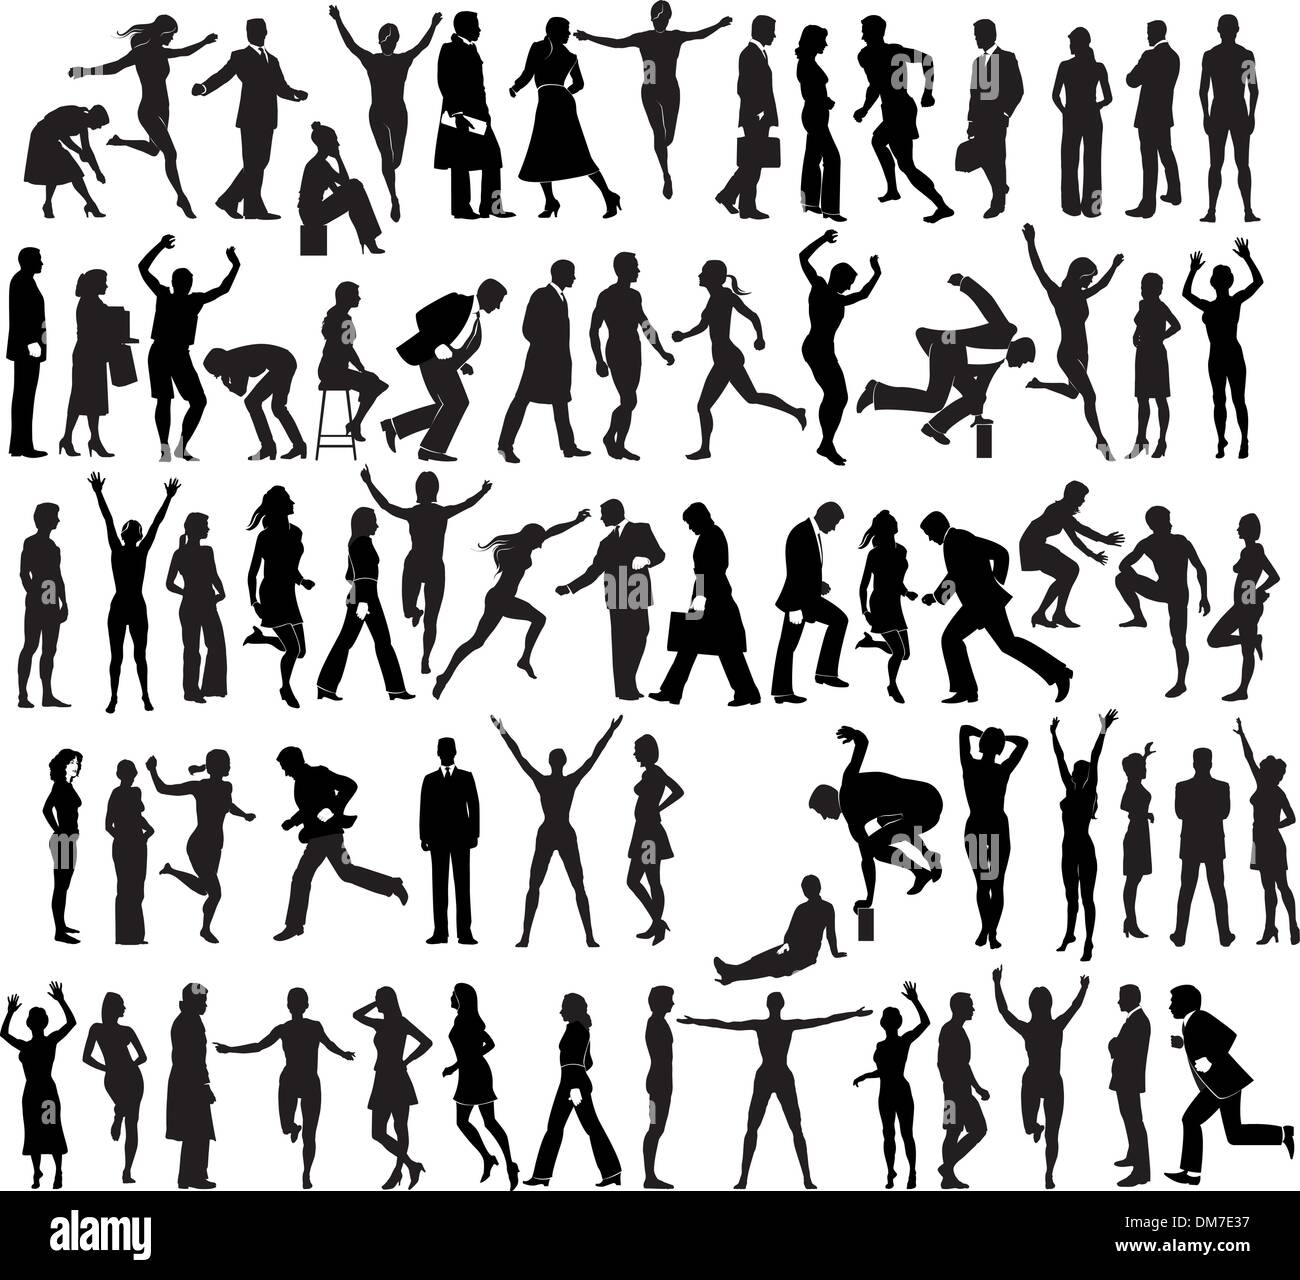 73 vector silhouettes of people in a variety of activities Stock Vector